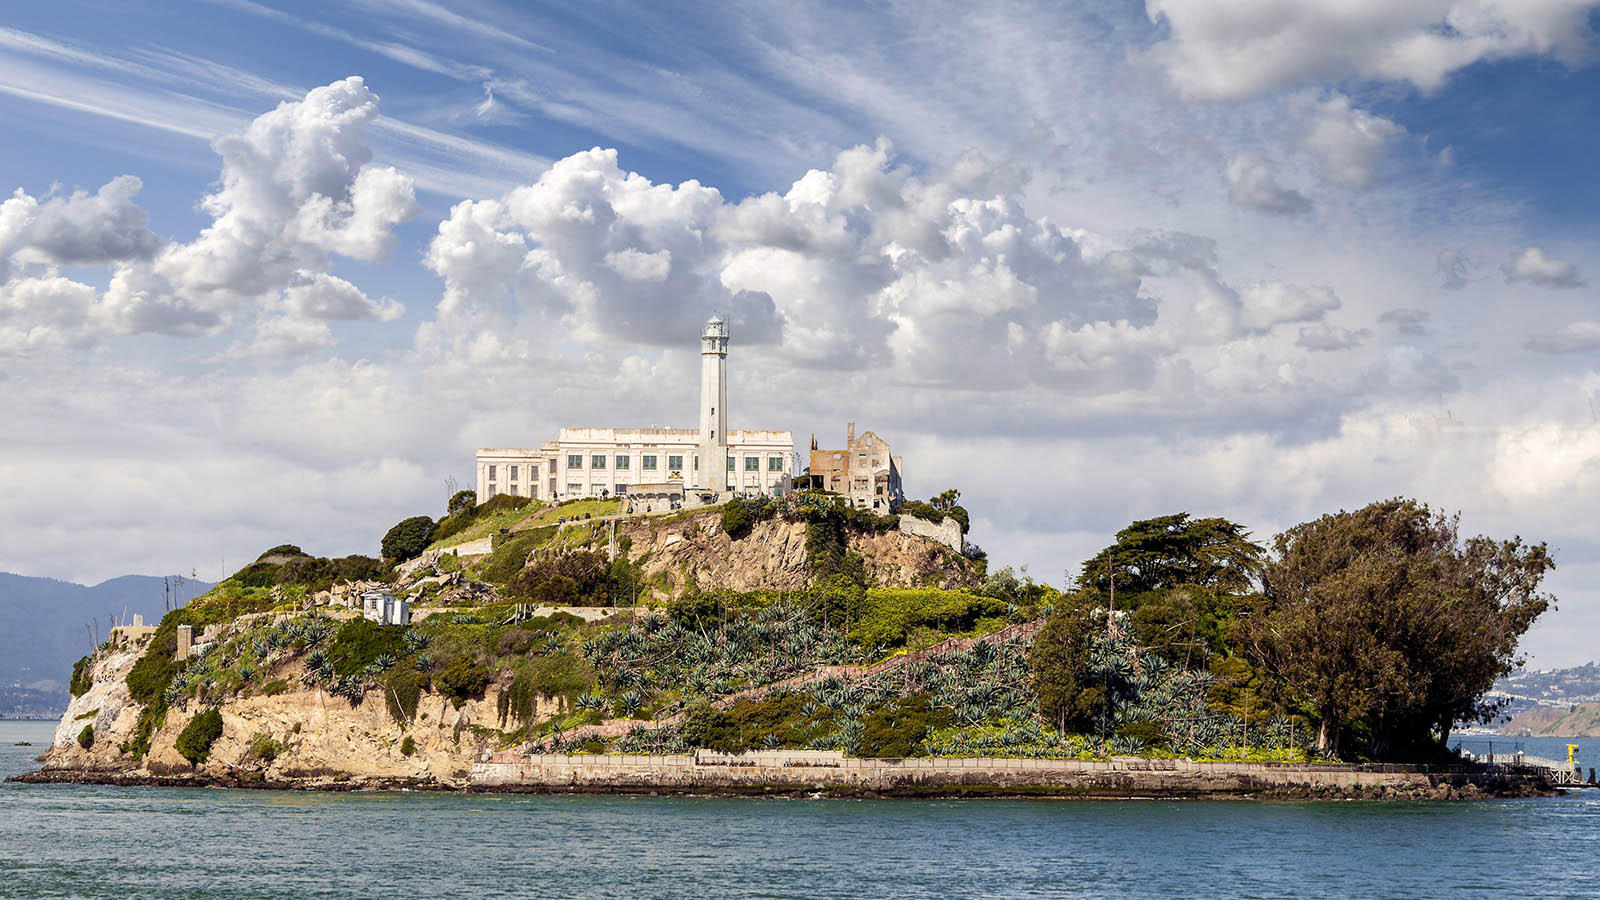 If You Get Over 80% On This General Knowledge Quiz, You’re Way Too Smart Alcatraz Island